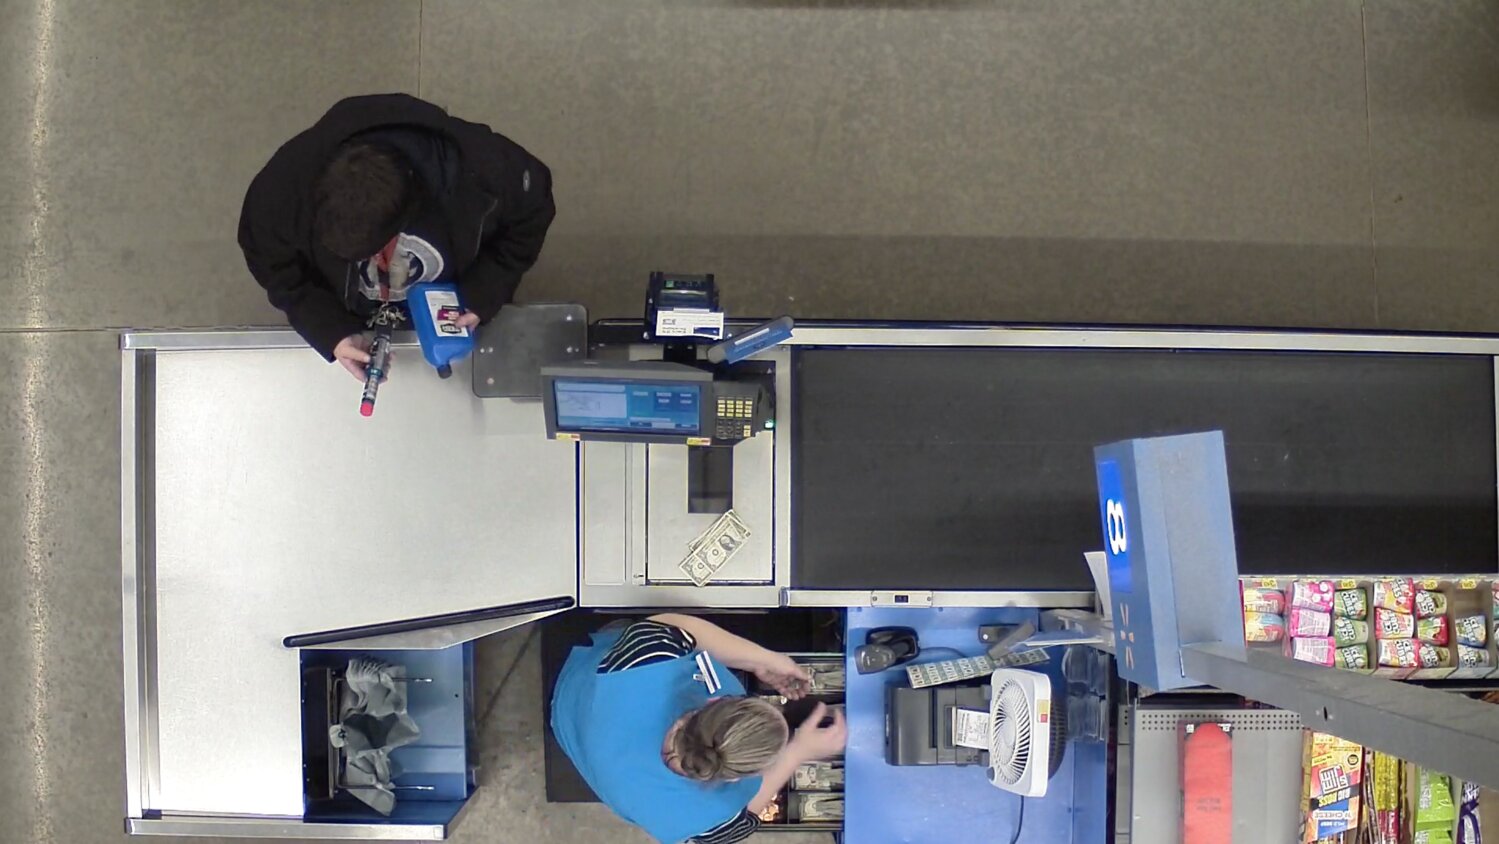 Bourke is seen setting a portion of the customer’s payment aside instead of placing the full amount in the cash register. (Photo is from a frame of the Tumwater Police Department video)